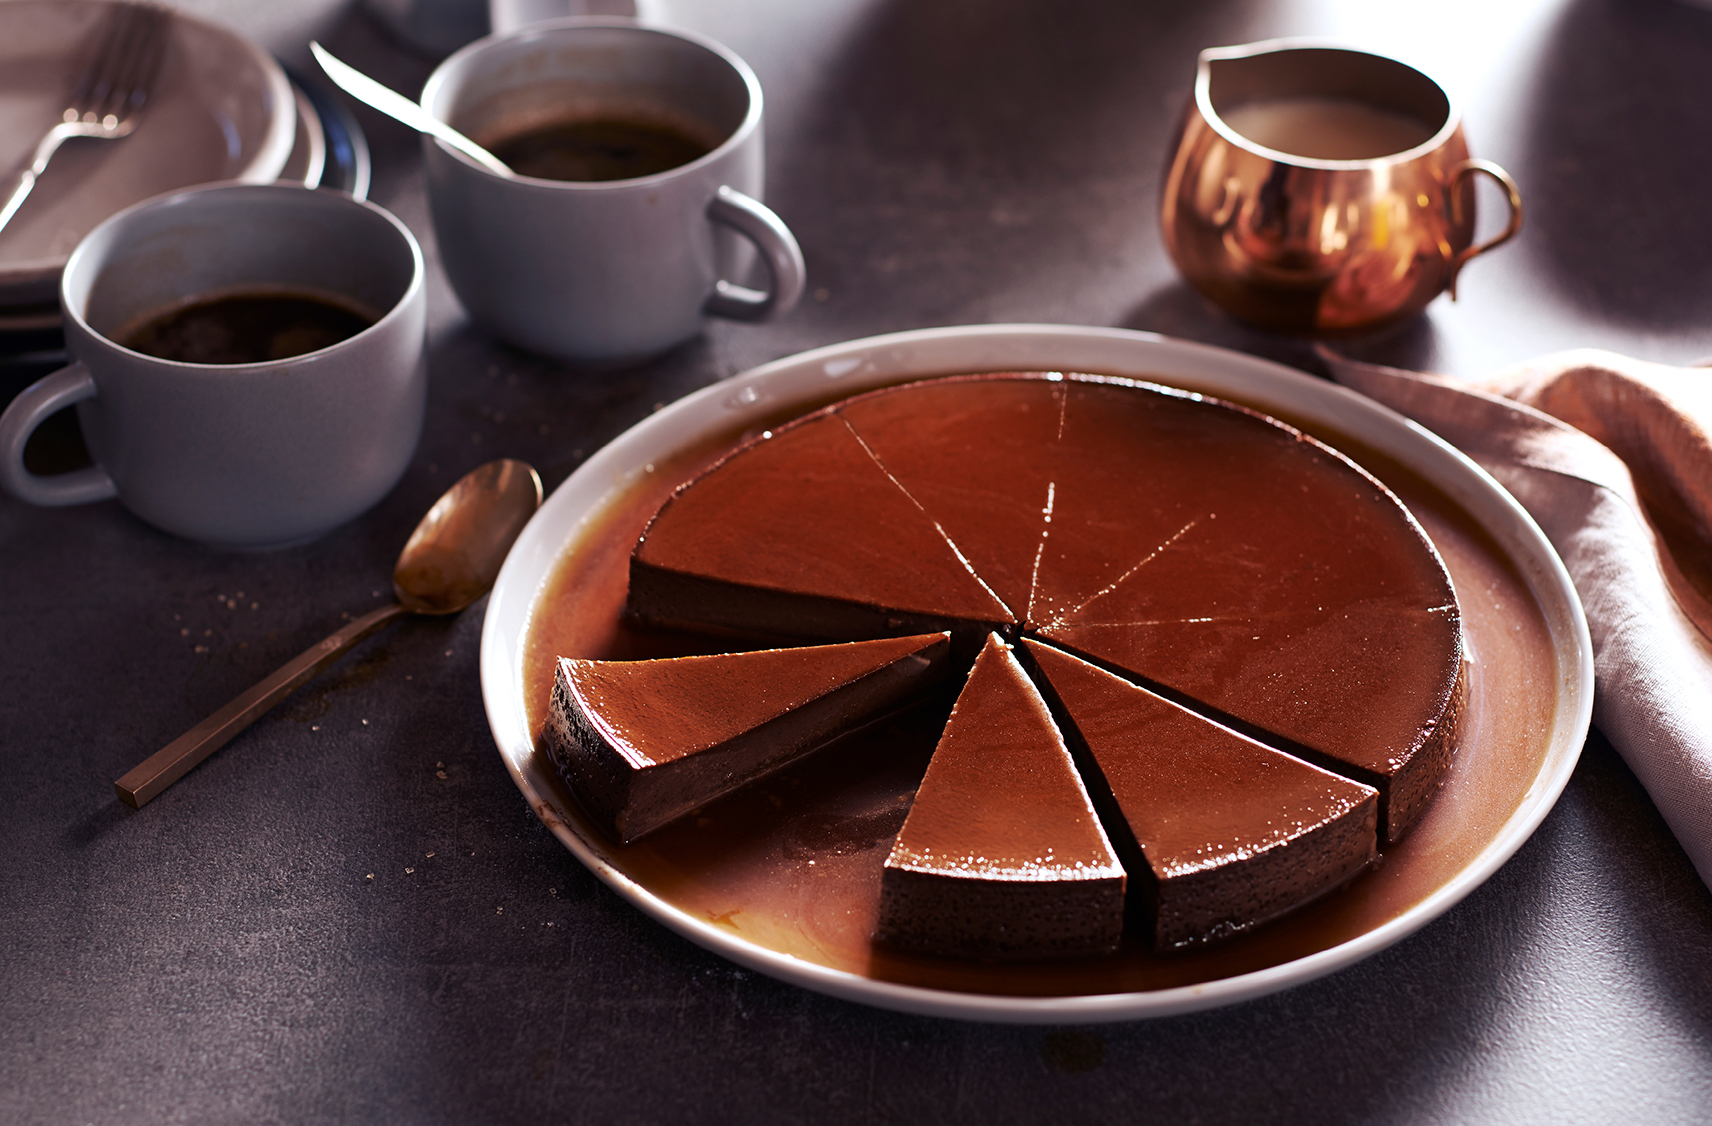 A chocolate flan sliced into 8 with one piece missing surrounded by cups of espresso and a serving cup for cream